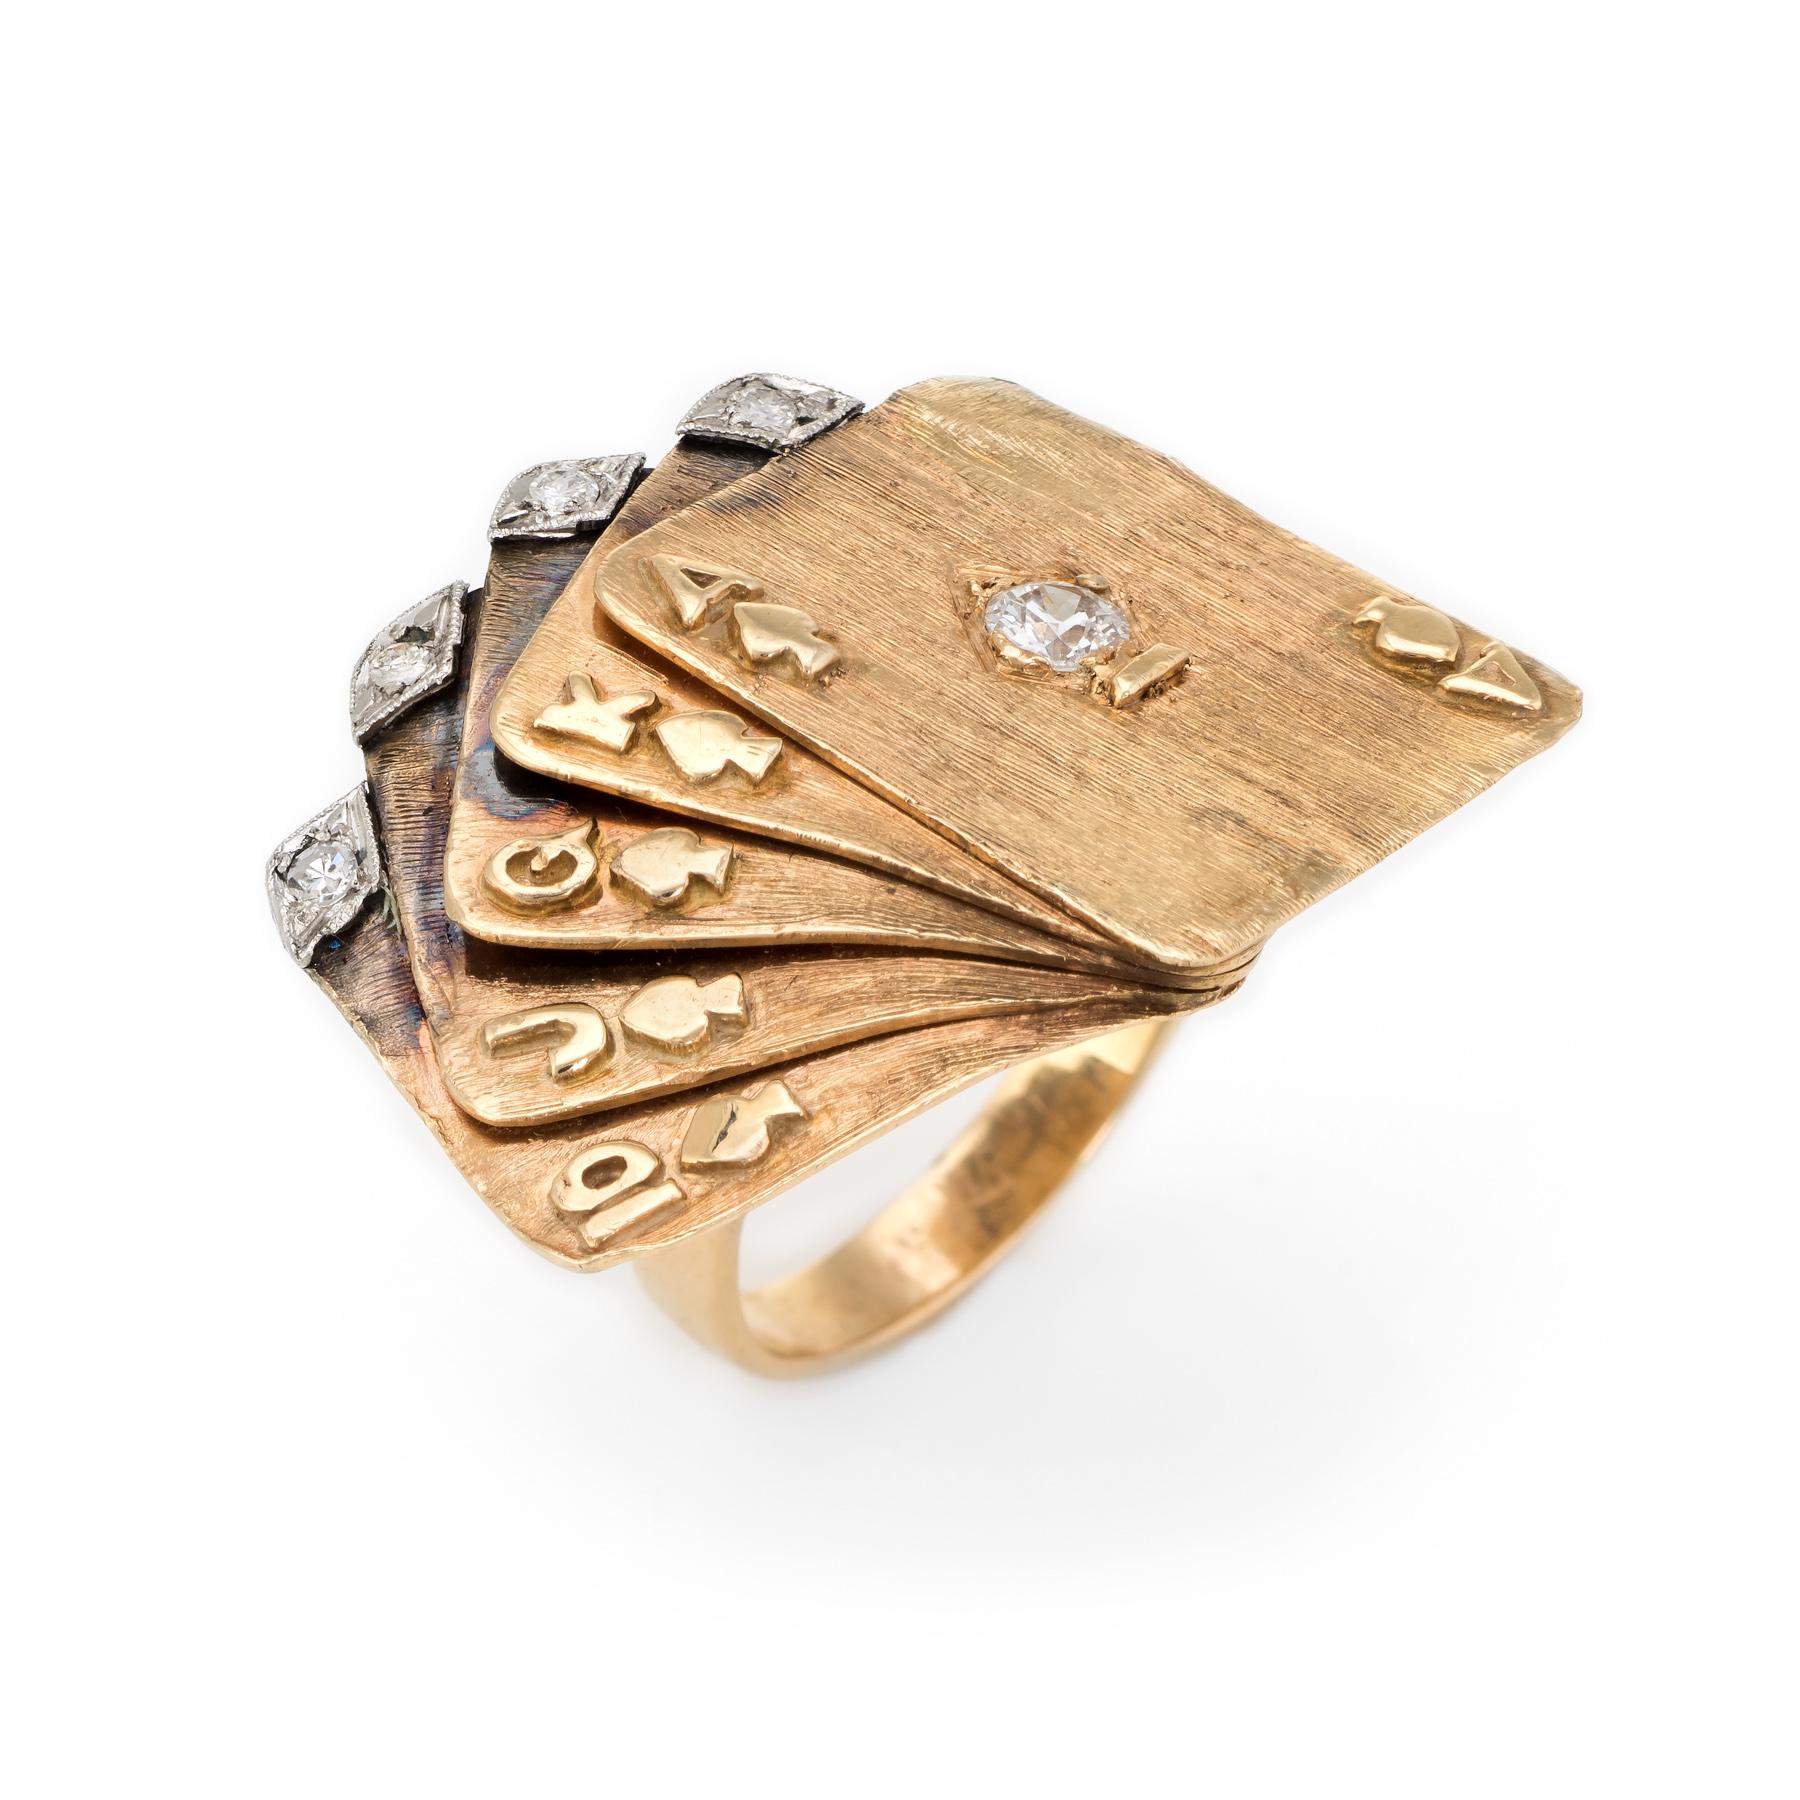 Distinct and unusual cocktail ring featuring a deck of cards (royal flush), circa 1960s to 1970s, crafted in 14 karat yellow gold. 

A larger estimated 0.20 carat old European cut diamond is set into the Ace, with four estimated 0.02 carat single